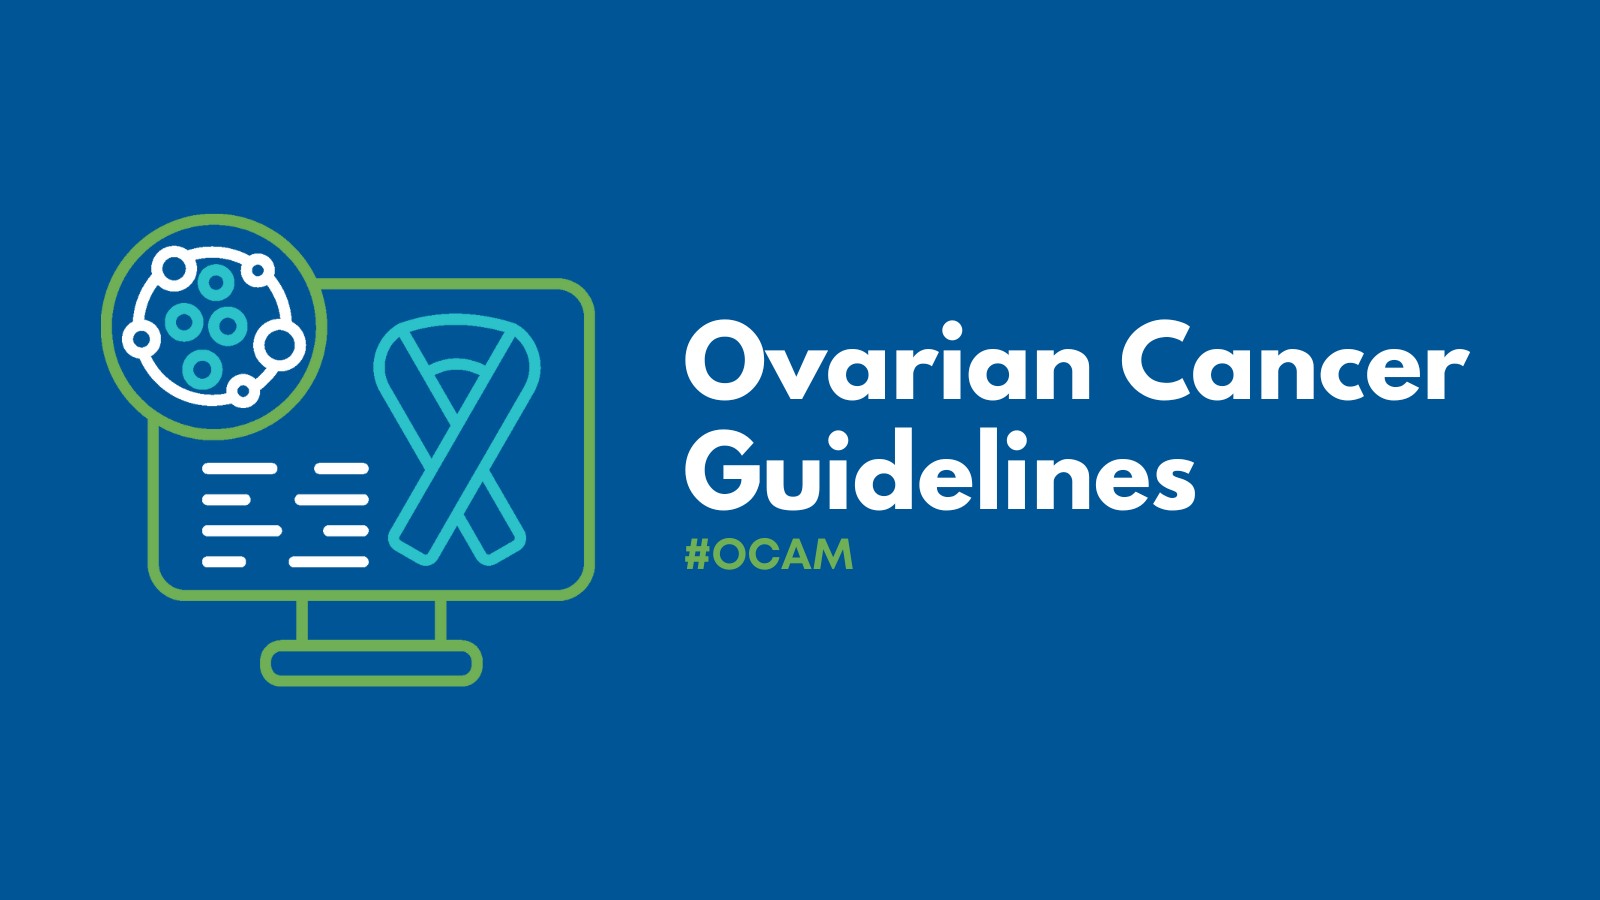 Ovarian Cancer Guidelines Hero Image